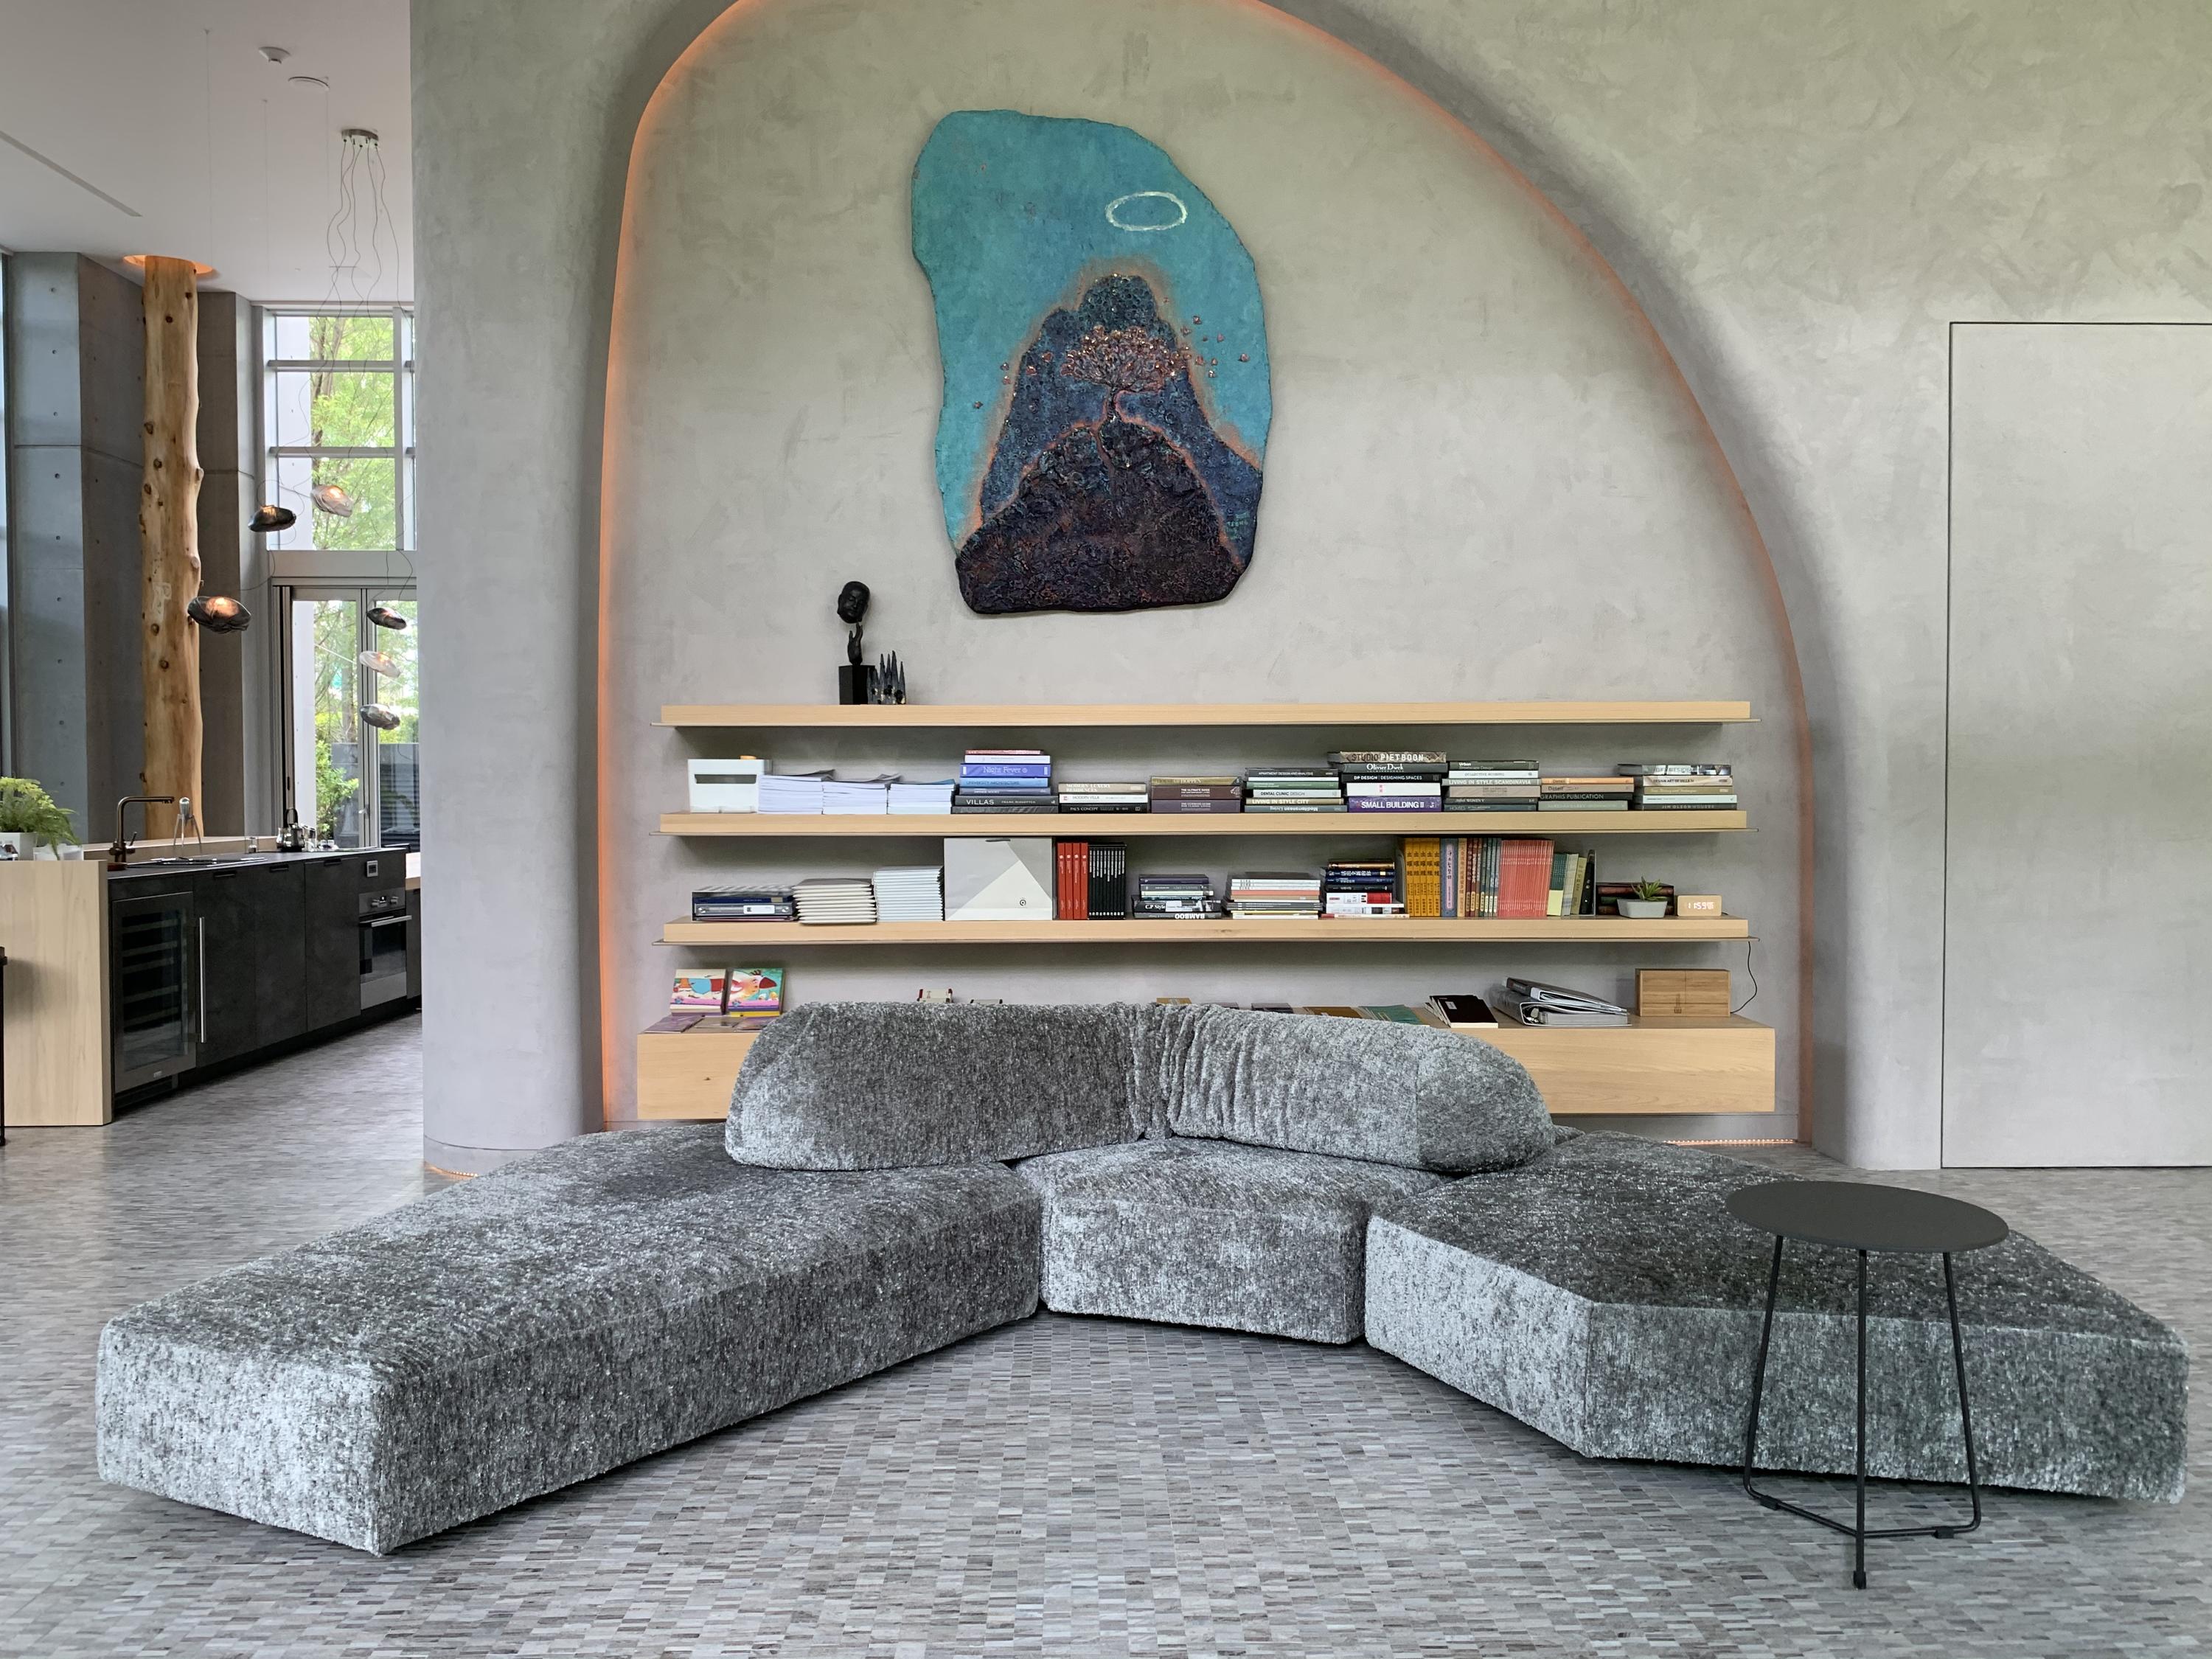 https://image.architonic.com/sto3-2/20747701/relaxing-on-the-rocks-the-story-of-edras-iconic-modular-sofa-01-arcit18.jpg